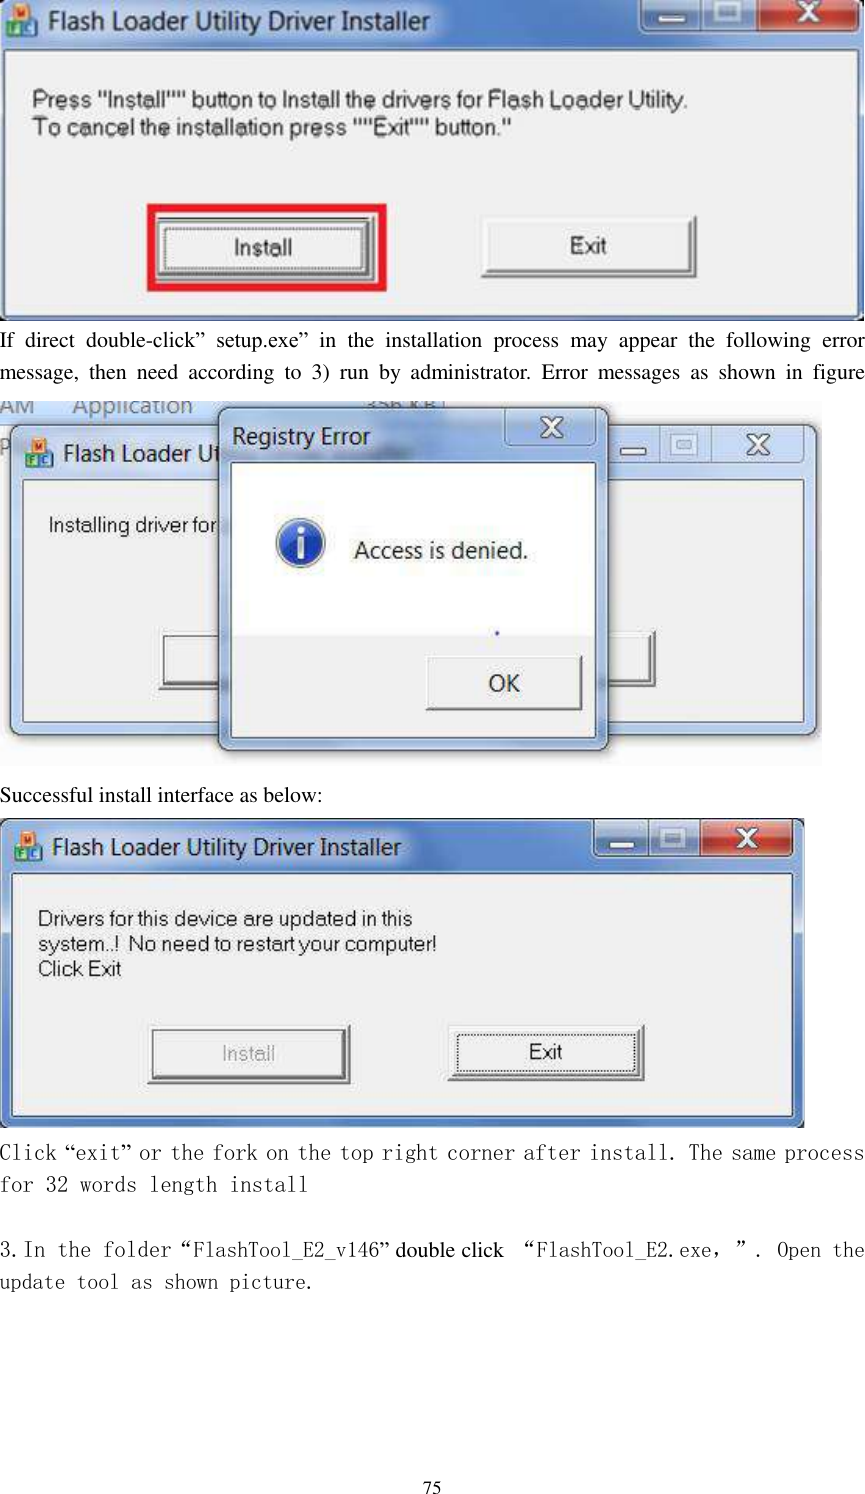      75  If  direct  double-click”  setup.exe” in the  installation  process  may  appear  the  following  error message,  then  need  according  to  3)  run  by  administrator.  Error  messages  as  shown  in  figure  Successful install interface as below:  Click “exit” or the fork on the top right corner after install. The same process for 32 words length install  3.In the folder“FlashTool_E2_v146” double click  “FlashTool_E2.exe，”. Open the update tool as shown picture. 